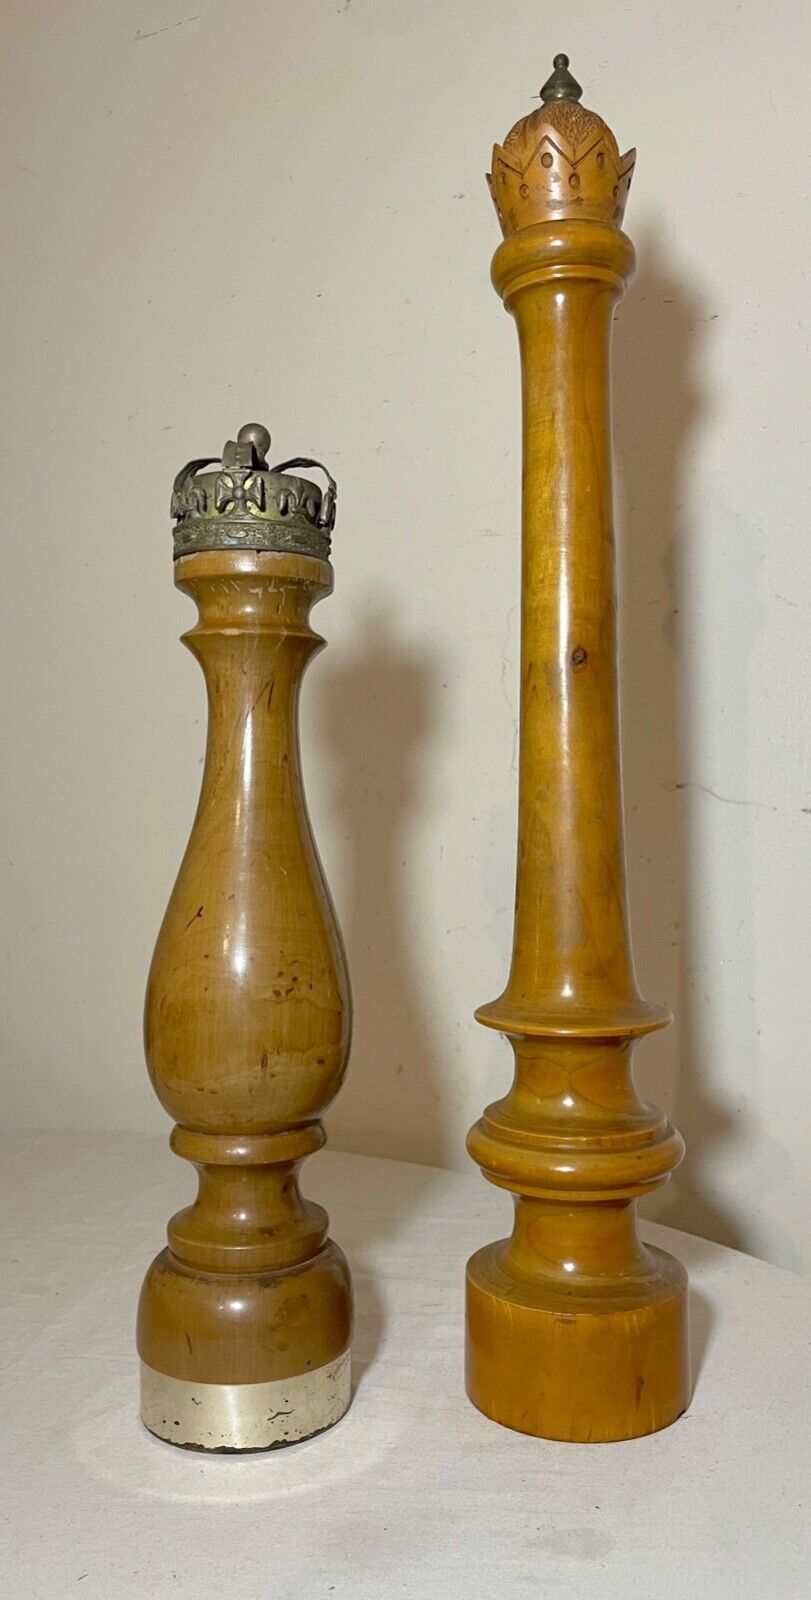 LARGE antique carved maple wood King Queen chess salt and pepper grinder mill